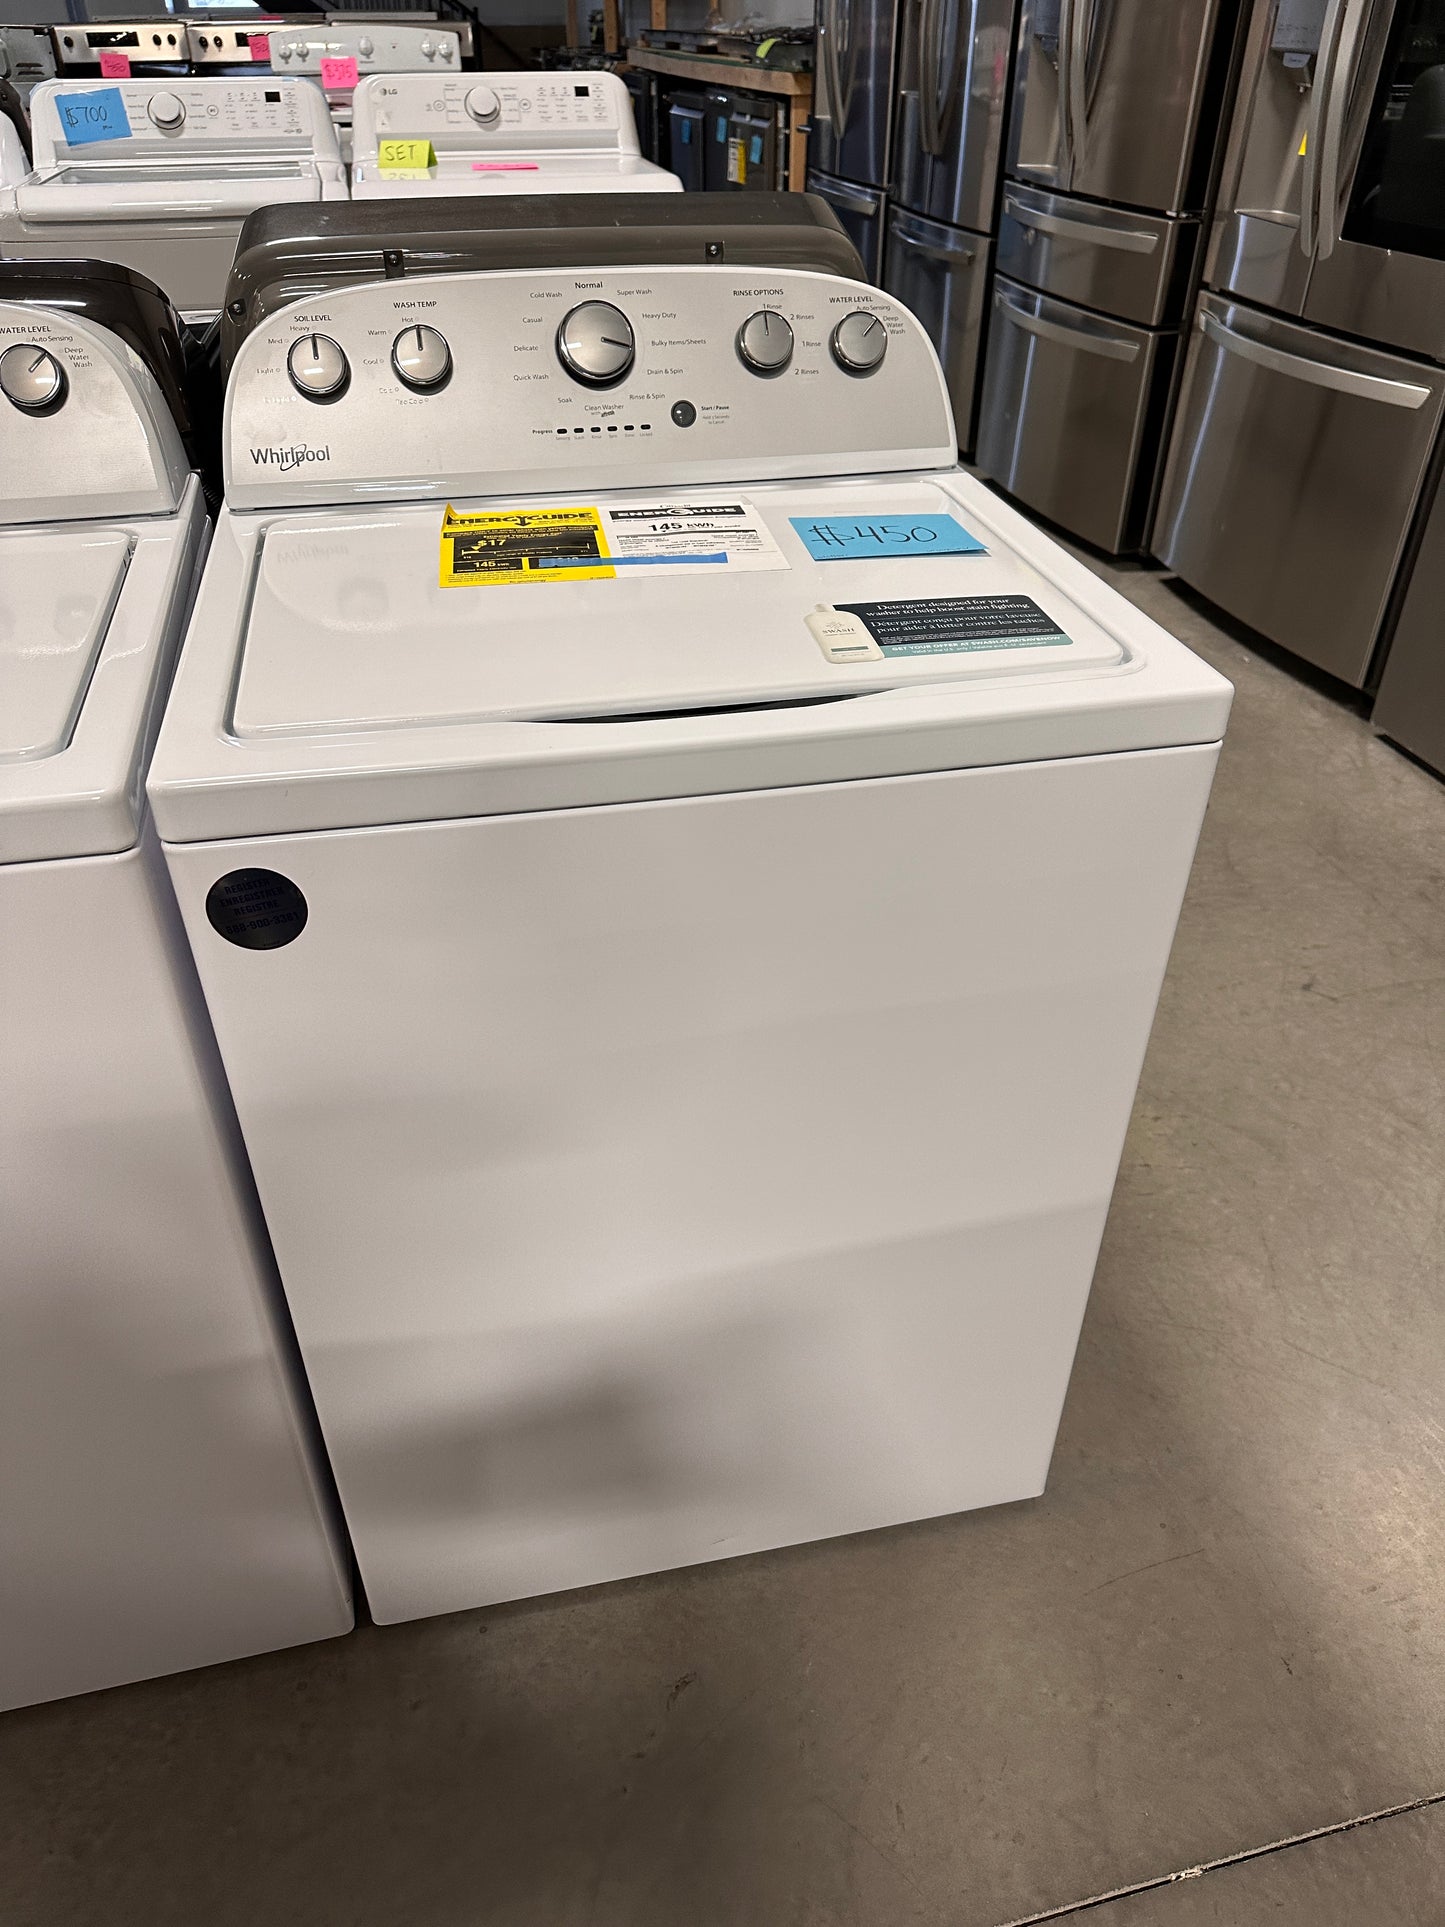 NEW 12-CYCLE WHIRLPOOL WASHER - WAS12941 WTW4816FW